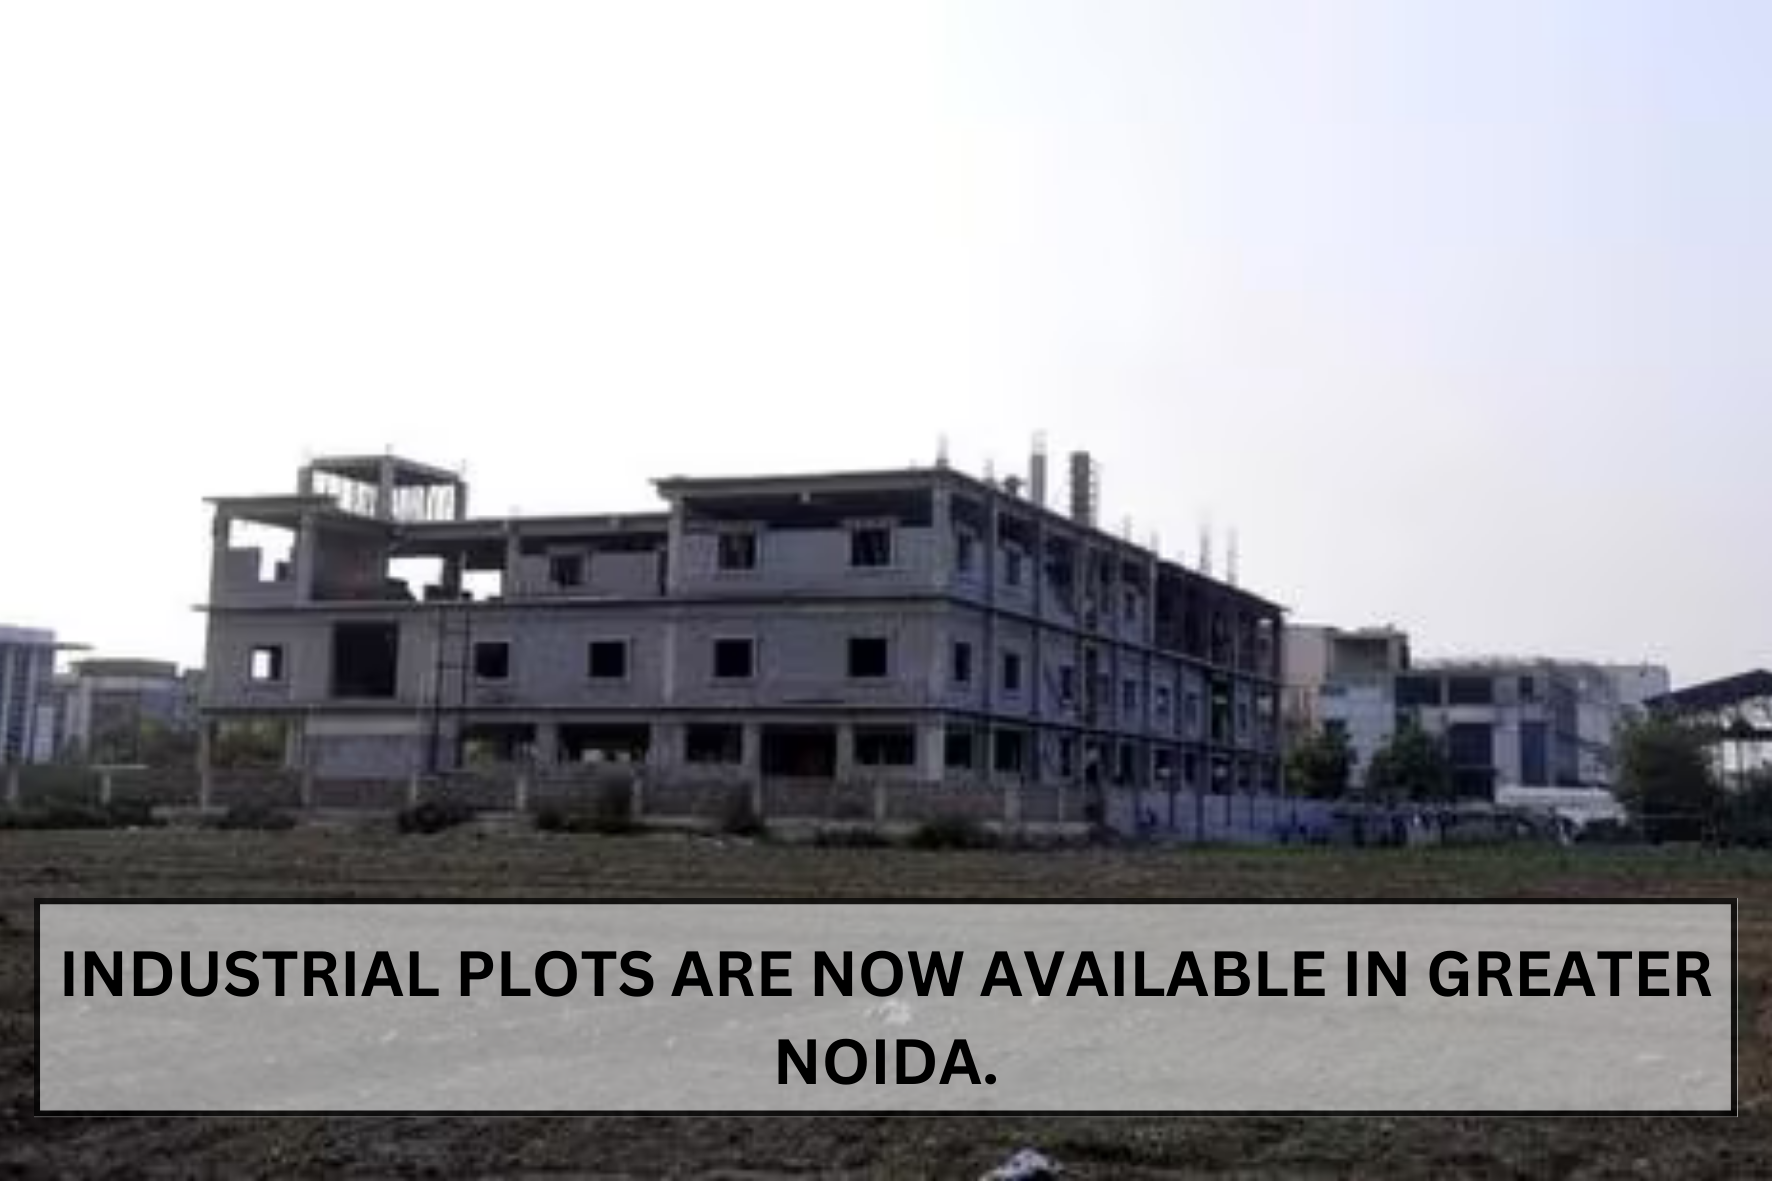 uploads/blog/Industrial_plots_are_now_available_in_Greater_Noida.png